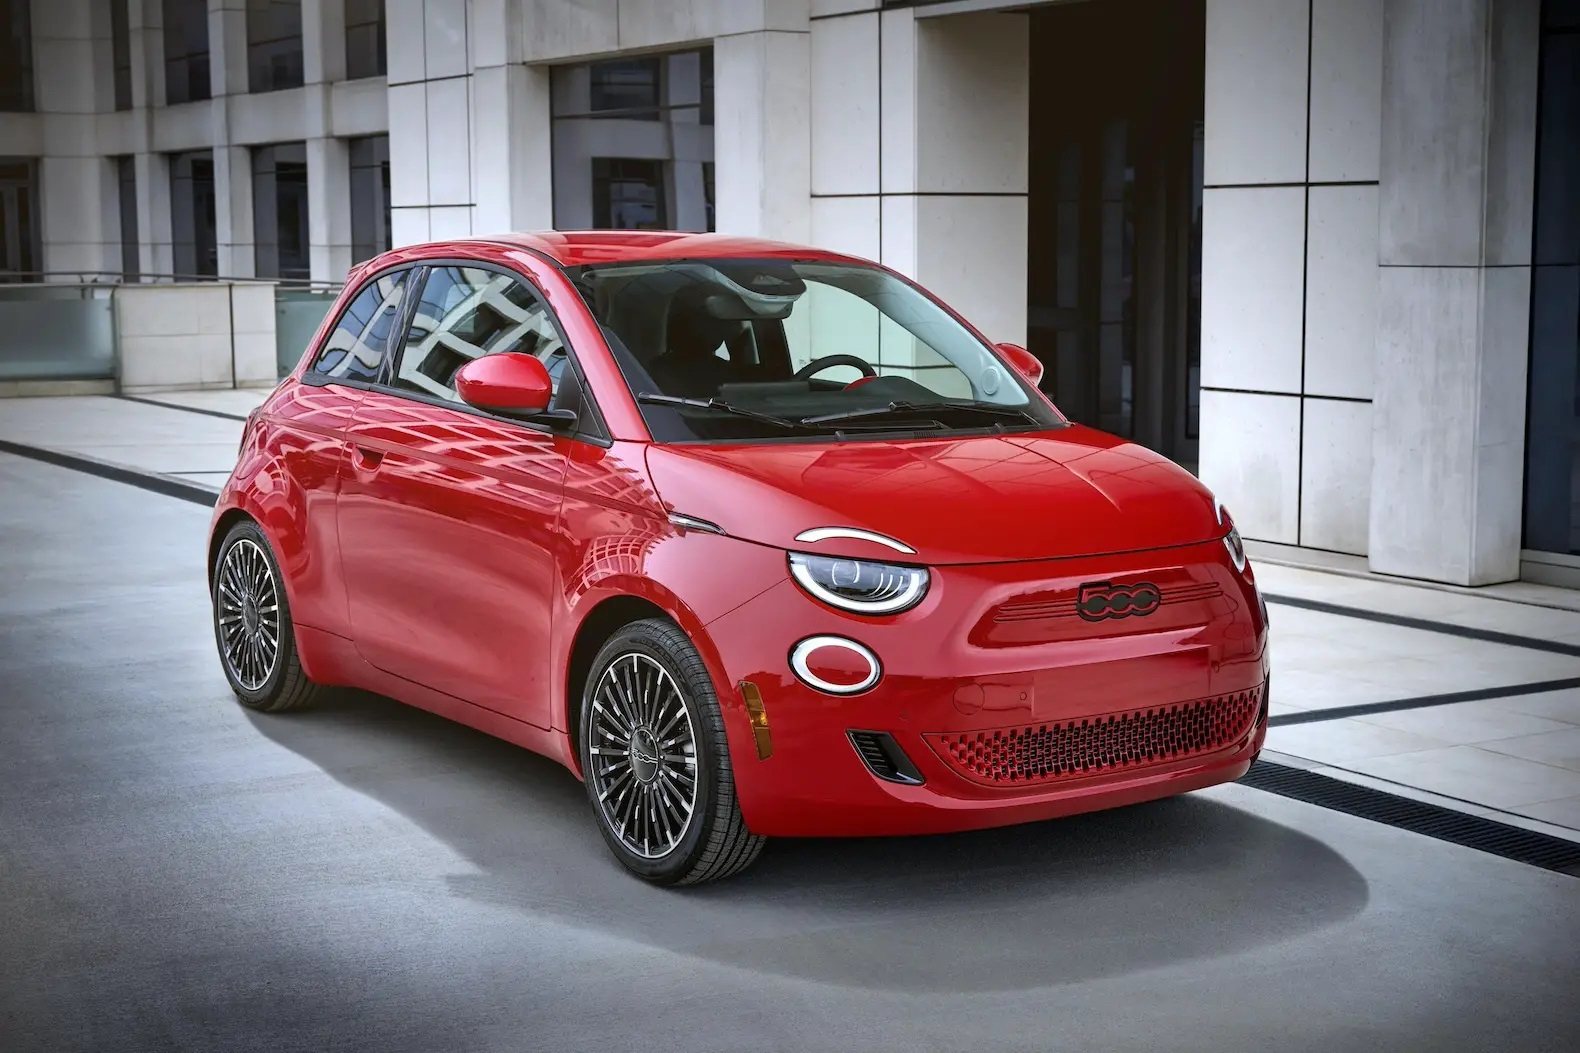 new-ev-fiat-500e-takes-a-different-approach-compared-to-the-cybertruck